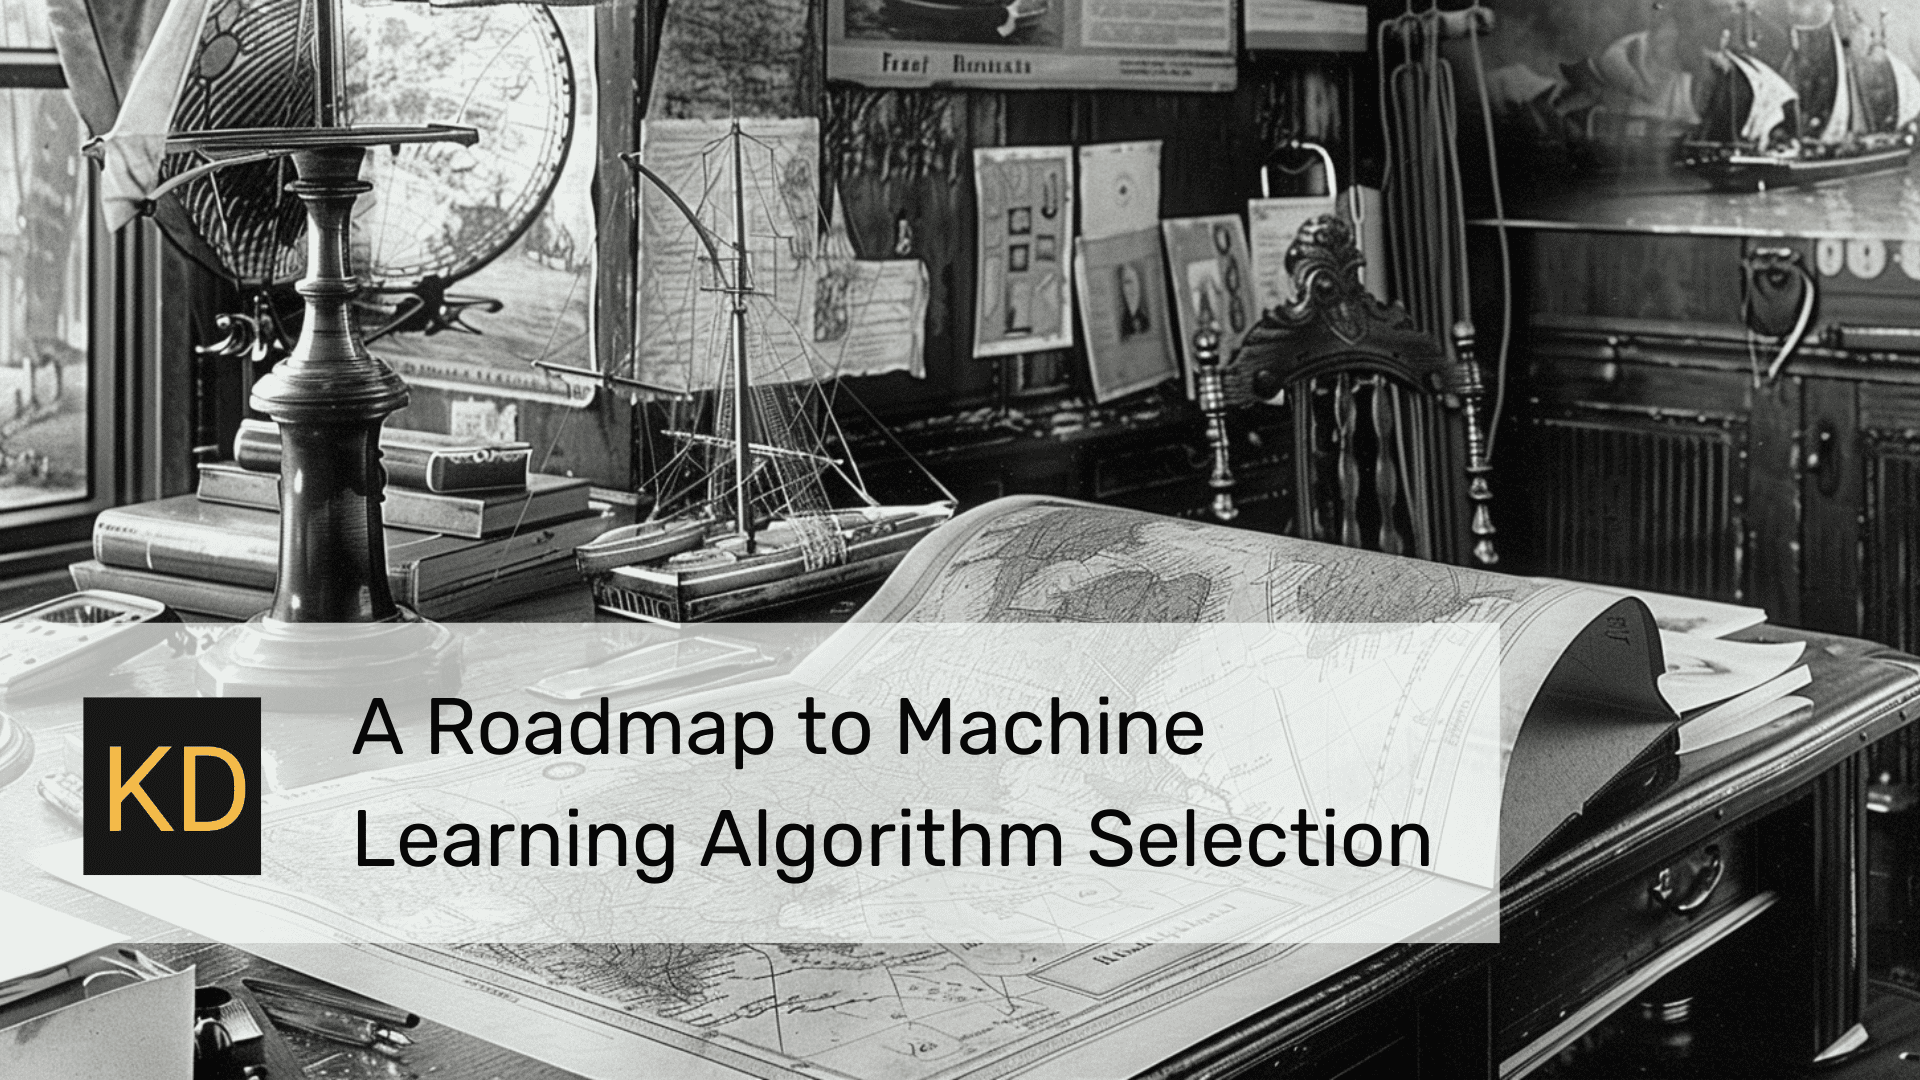 A Roadmap to Machine Learning Algorithm Selection